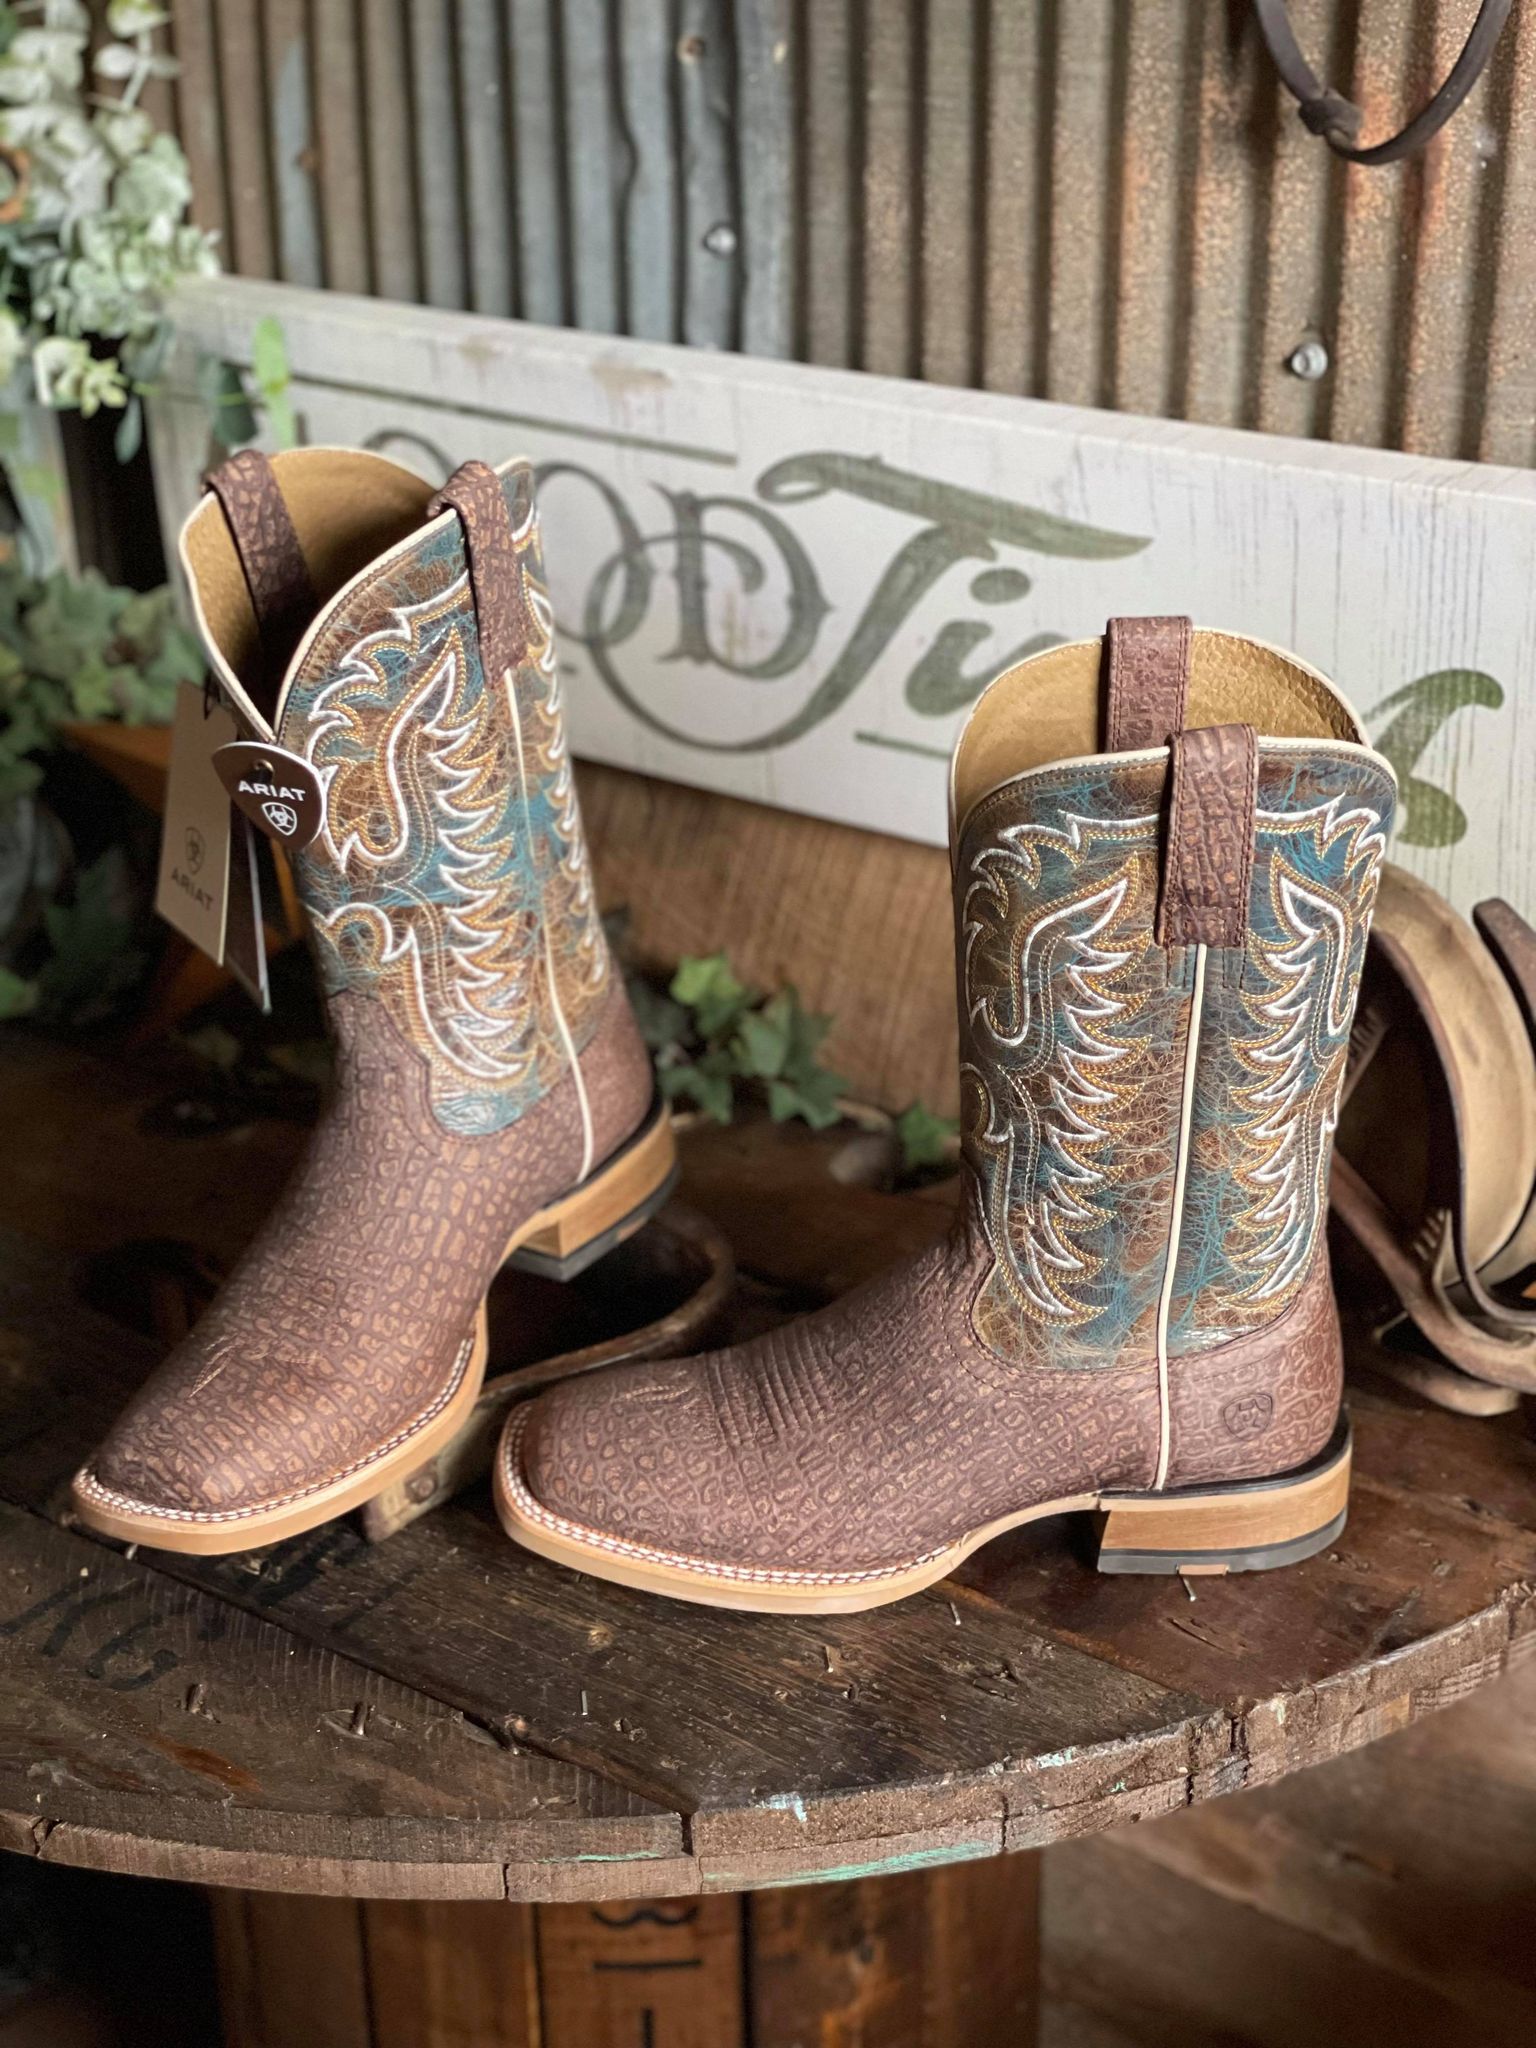 Men's Ariat Stinger Square Toe Boot-Men's Boots-Ariat-Lucky J Boots & More, Women's, Men's, & Kids Western Store Located in Carthage, MO